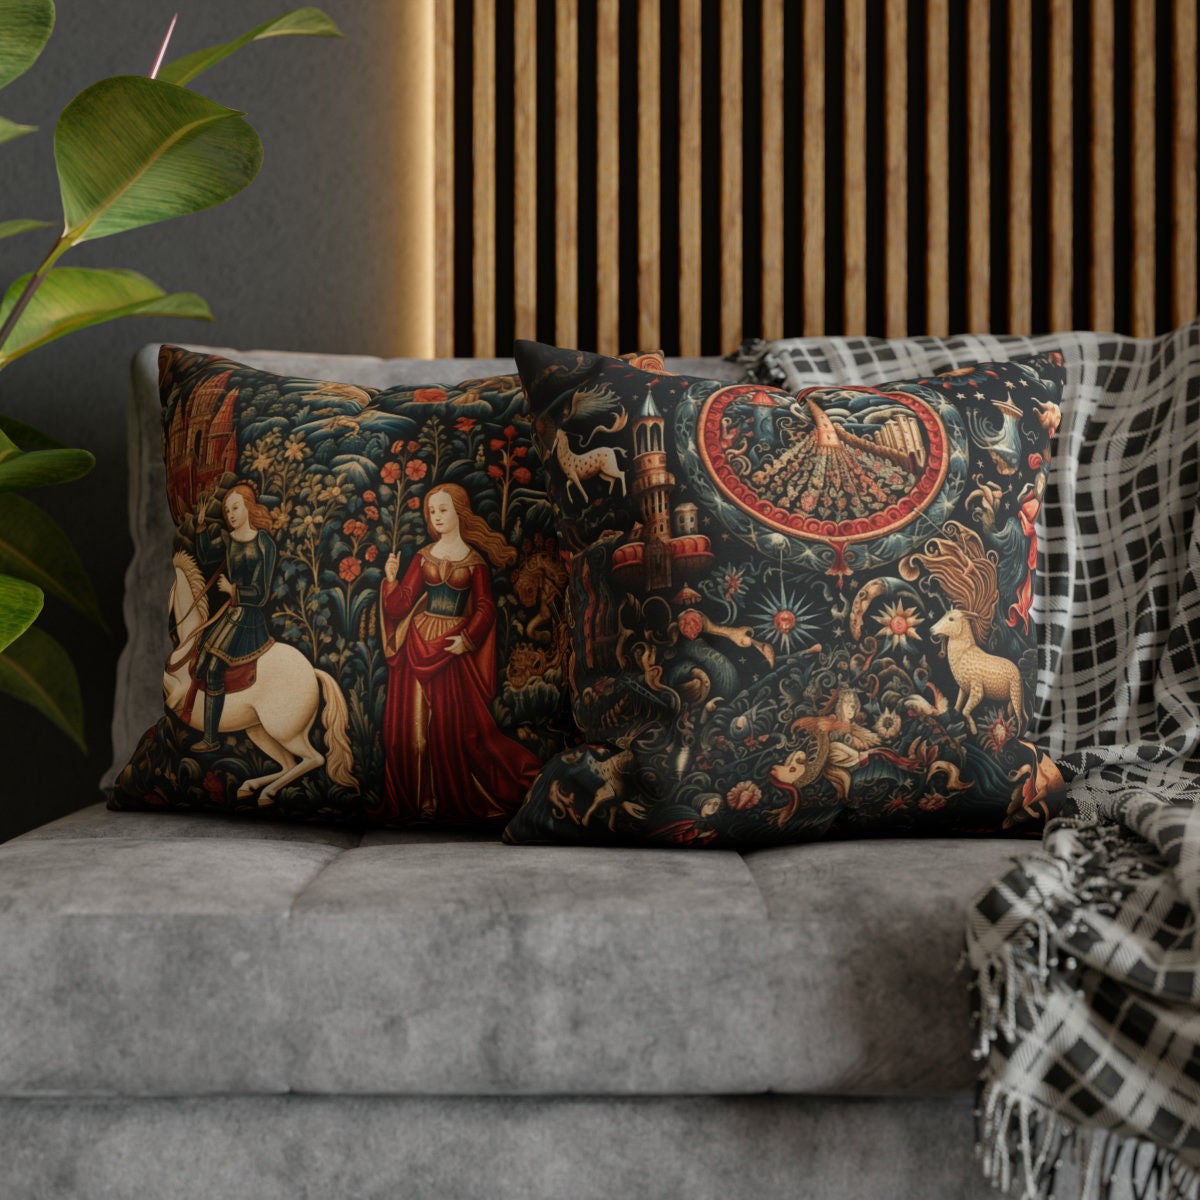 Casa Padrino luxury decorative pillow medieval multicolored 45 x 45 cm -  Printed cushion with fine tapestry fabric - Luxury decorative accessories 